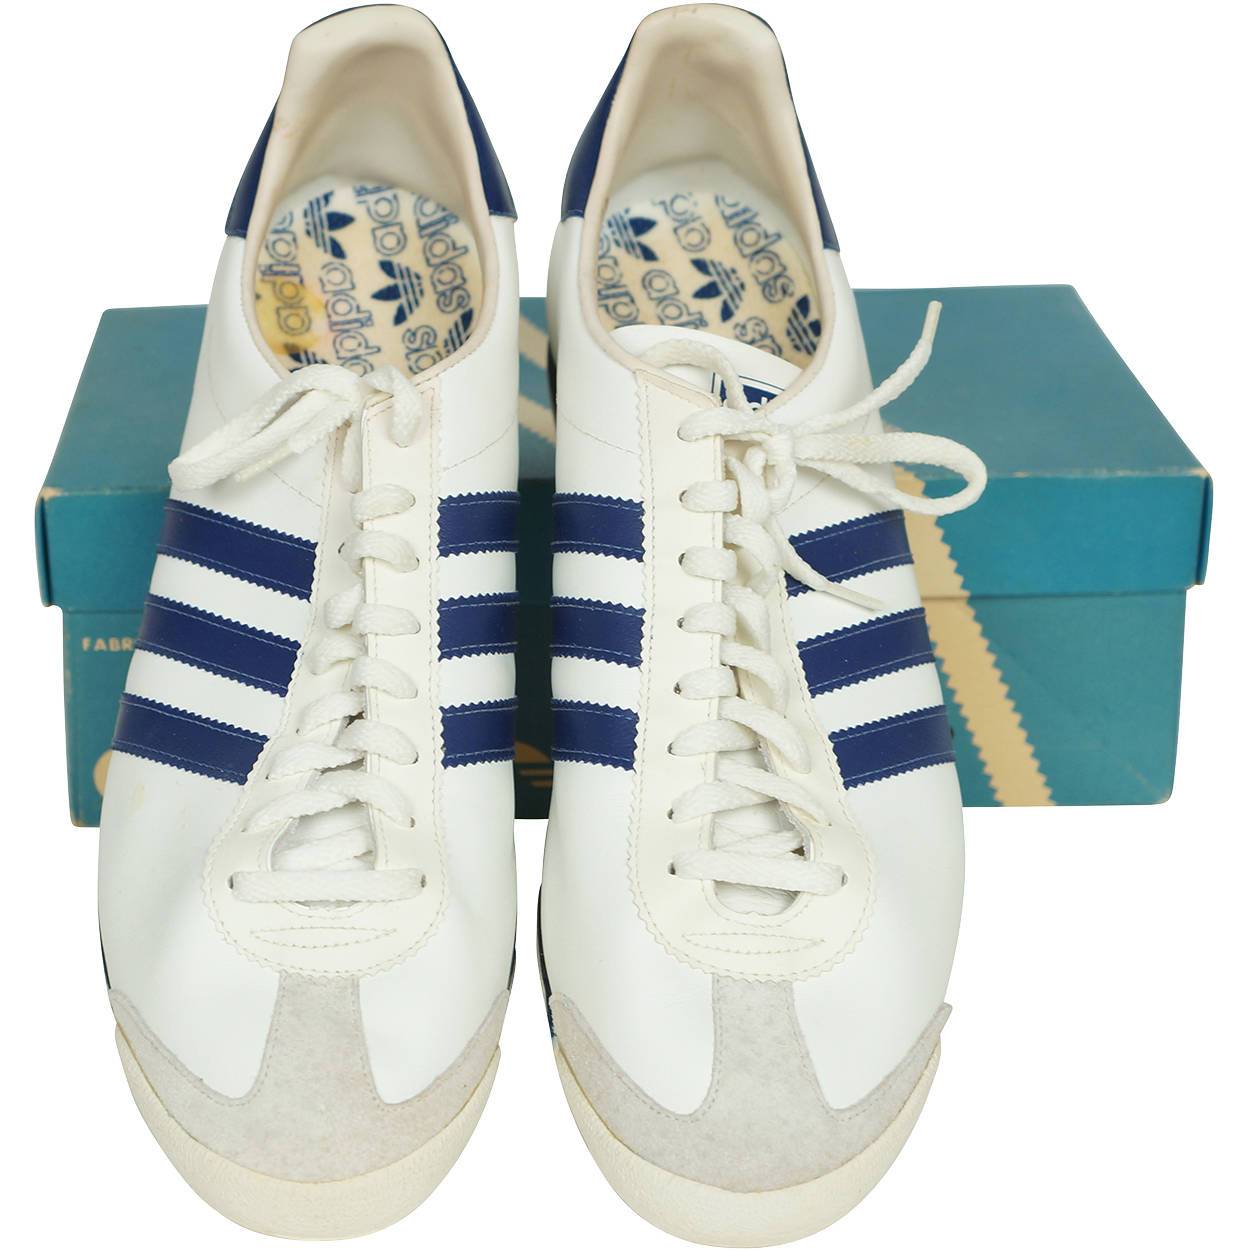 adidas 70s running shoes